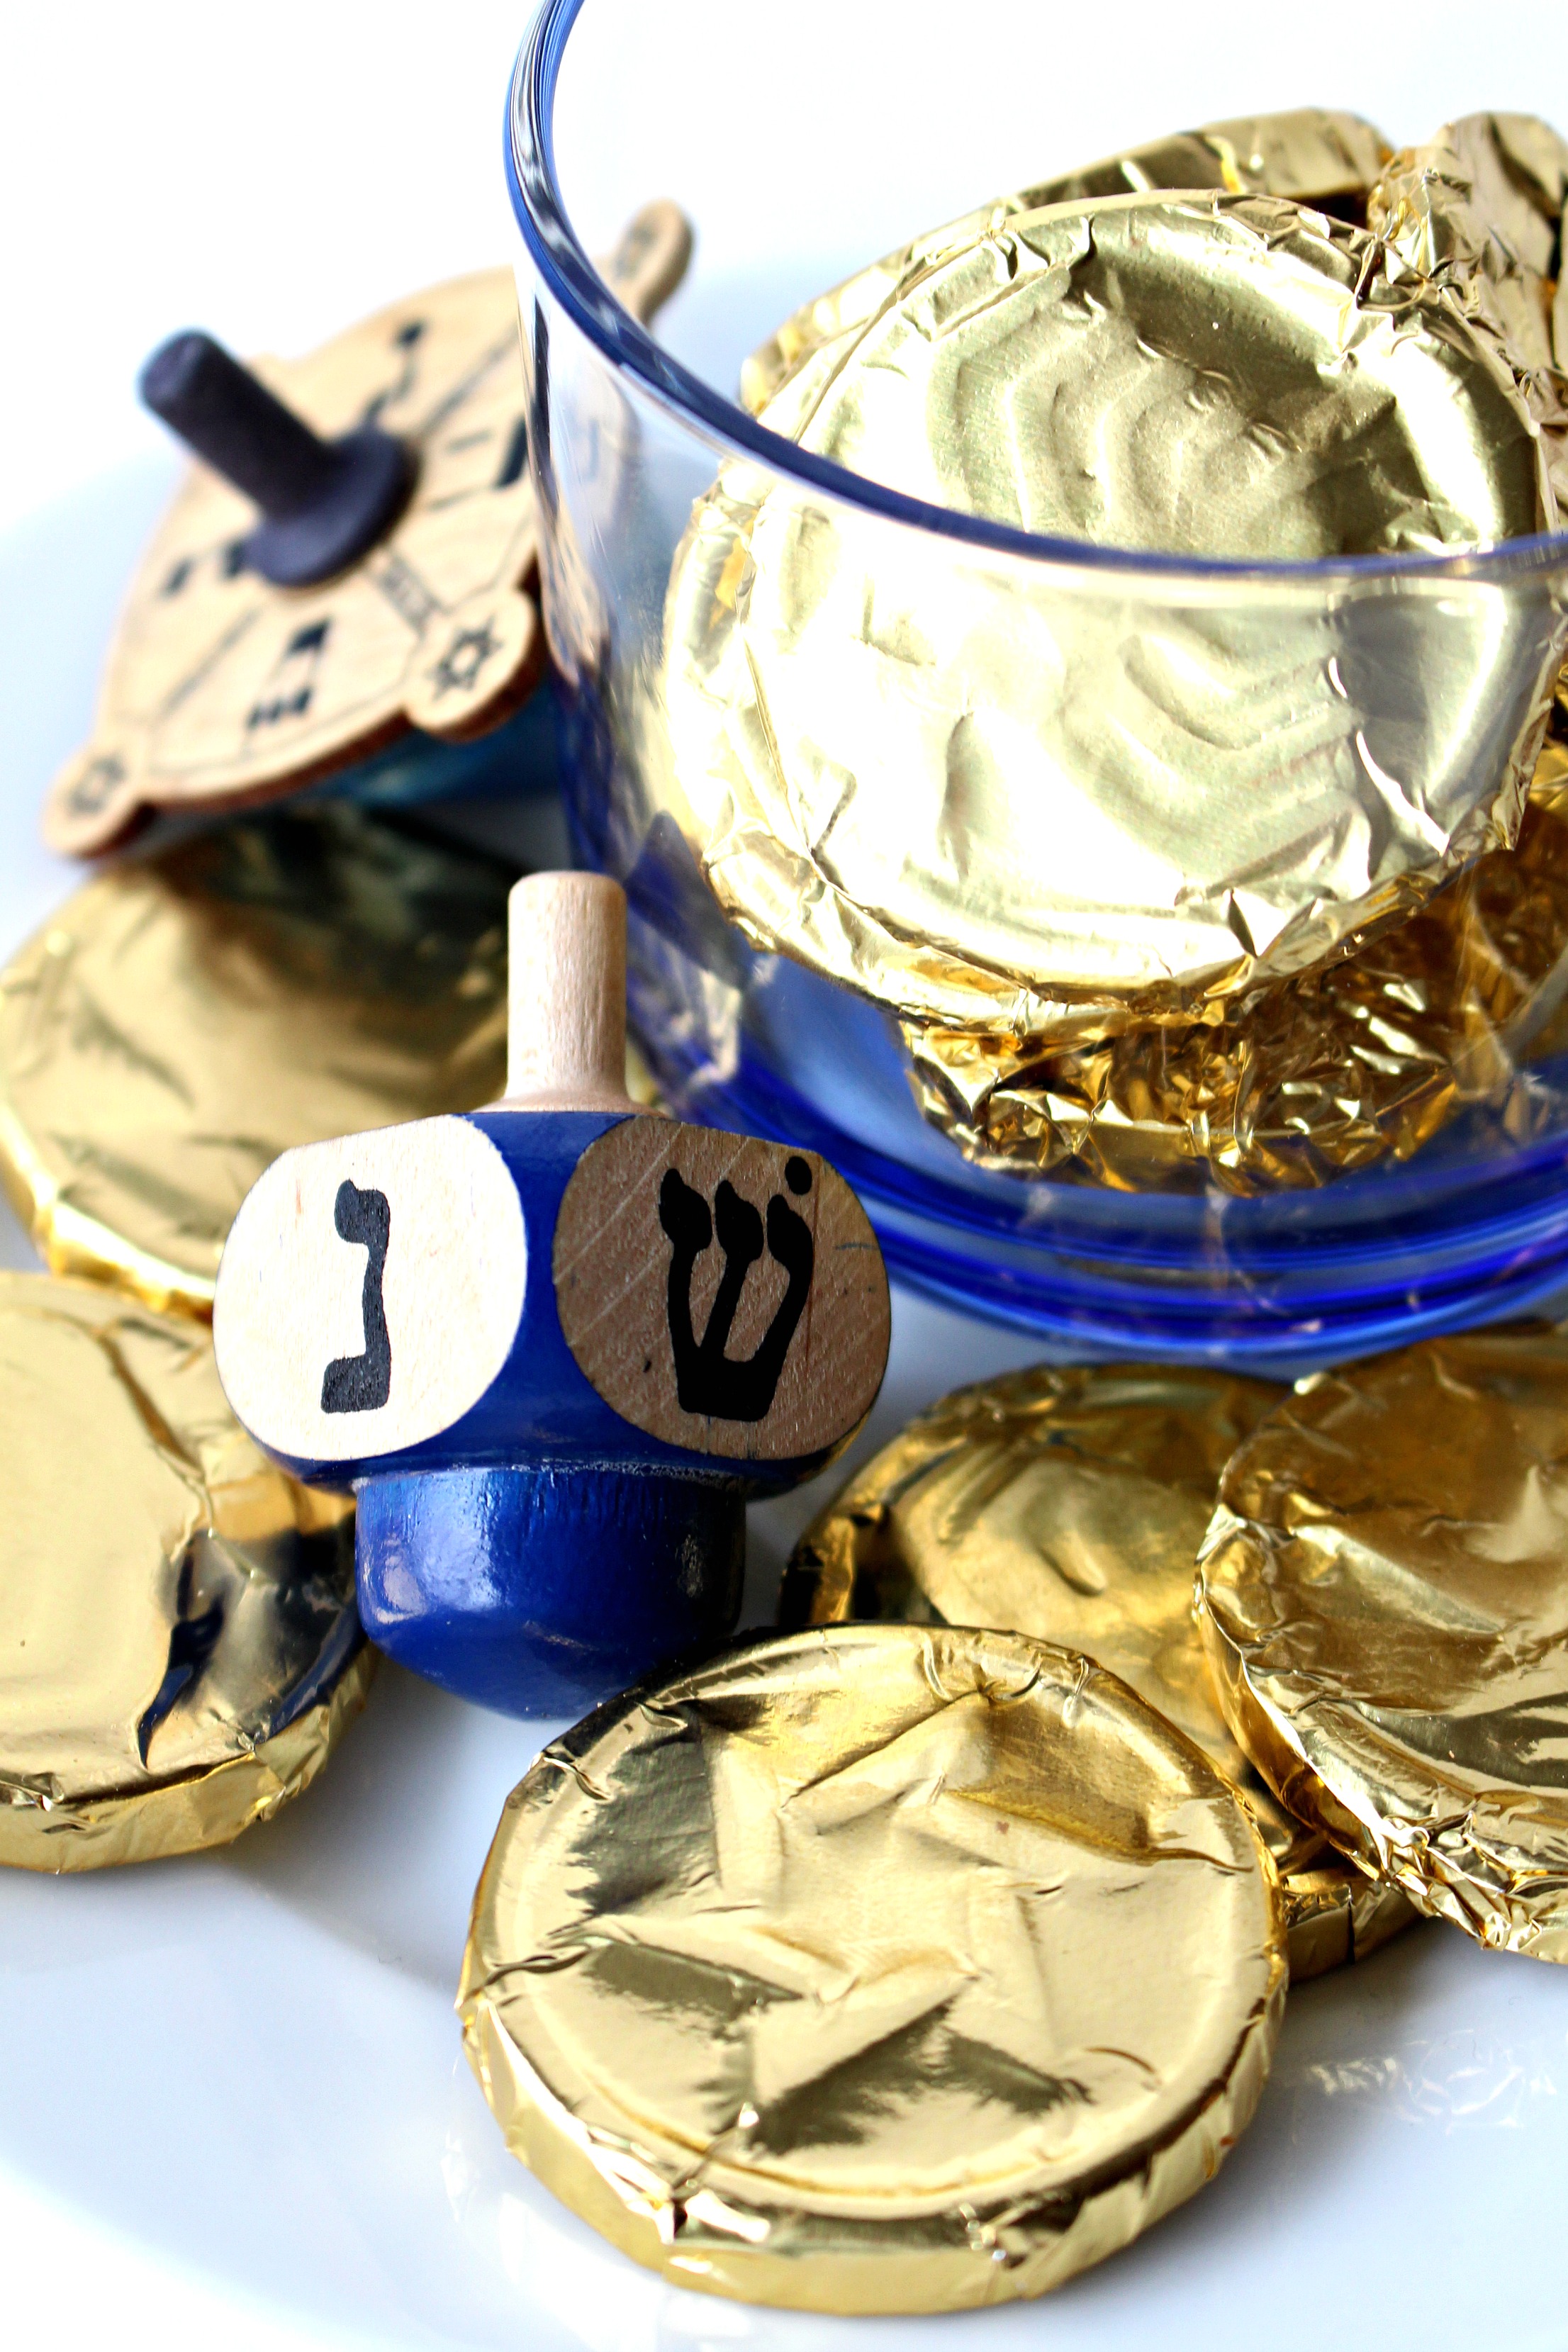 Gold foil wrapped chocolate coins with a blue dreidle